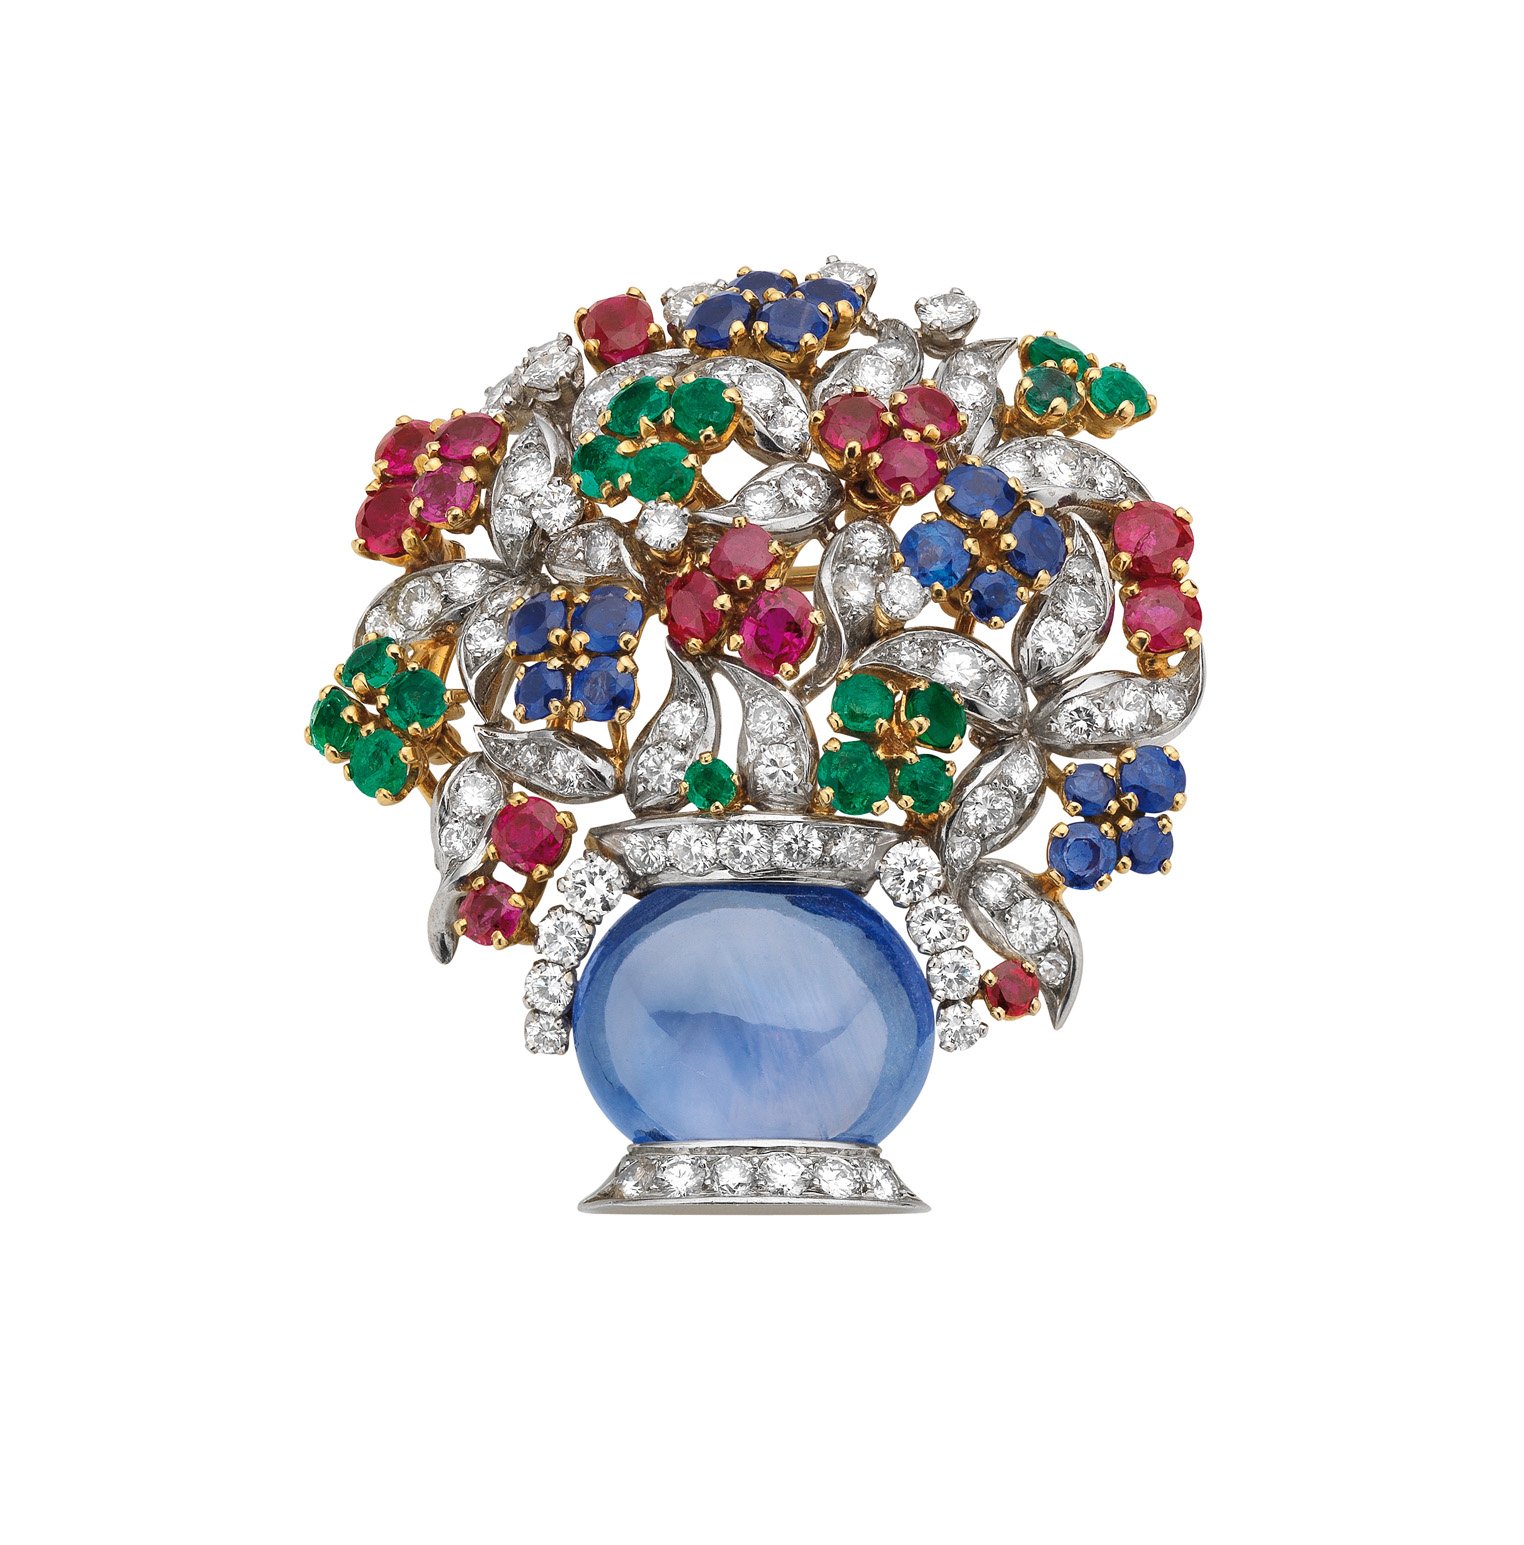 "Giardinetto" brooch in gold and platinum with sapphires, emeralds, rubies and diamonds, 1960. The vase formed of an oval cabochon sapphire on a diamond-set stand, the foliage suggested by leaf-shaped diamond pave set motifs, the flower-heads decorated with circular-cut emeralds, rubies and sapphires. Marks: on the mount, at the base of the vase: "BVLGARI" engraved.